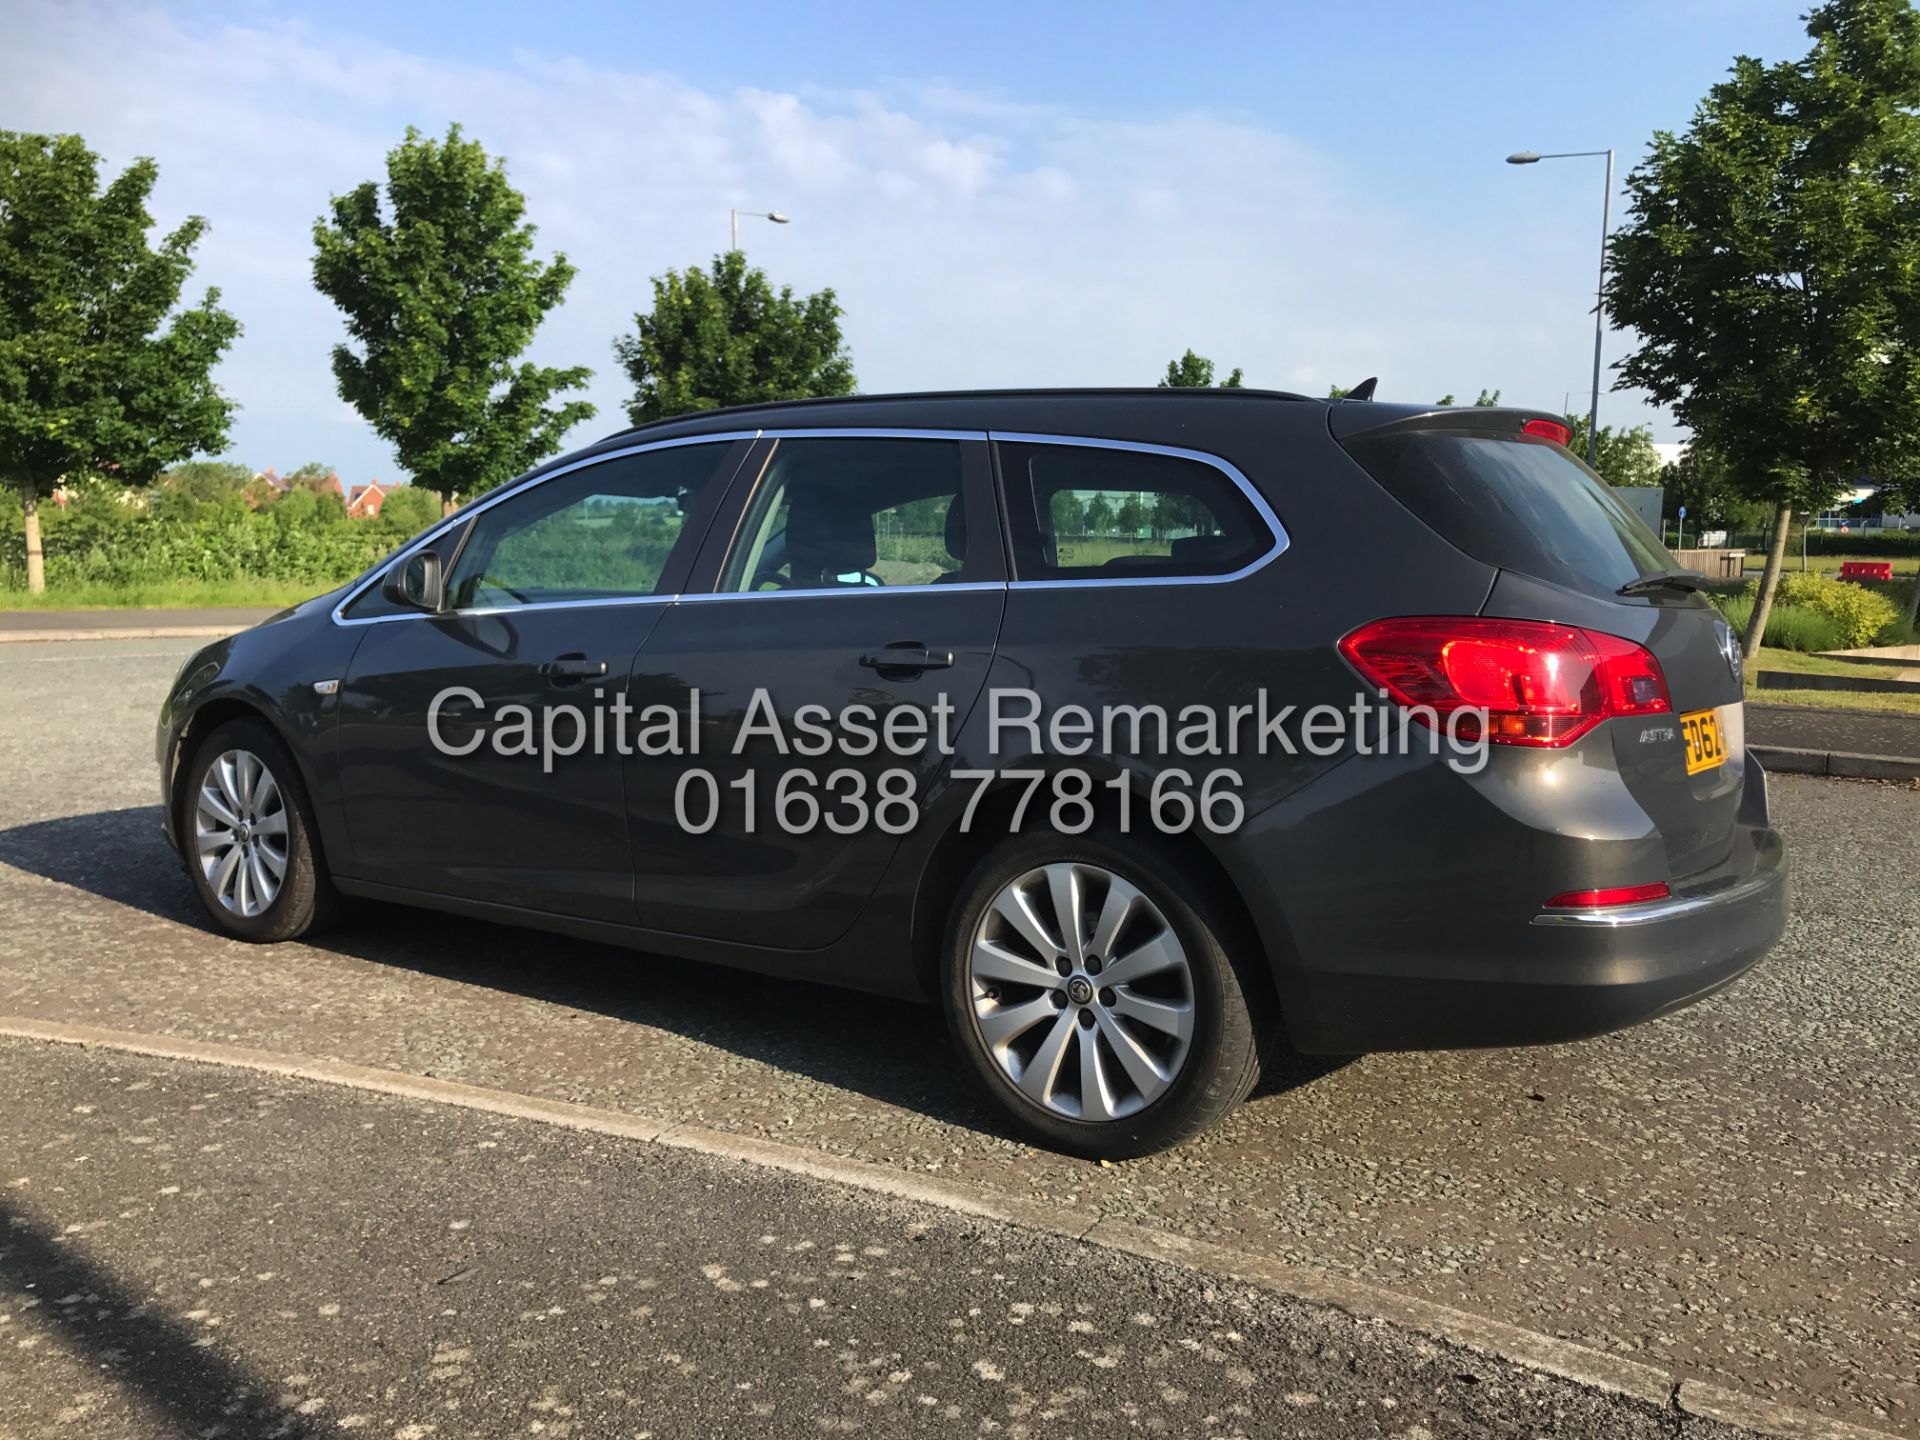 On Sale VAUXHALL ASTRA 1.3CDTI "TECH LINE" ESTATE (2013 MODEL) 1 OWNER WITH HISTORY SAT NAV AIR CON - Image 7 of 20